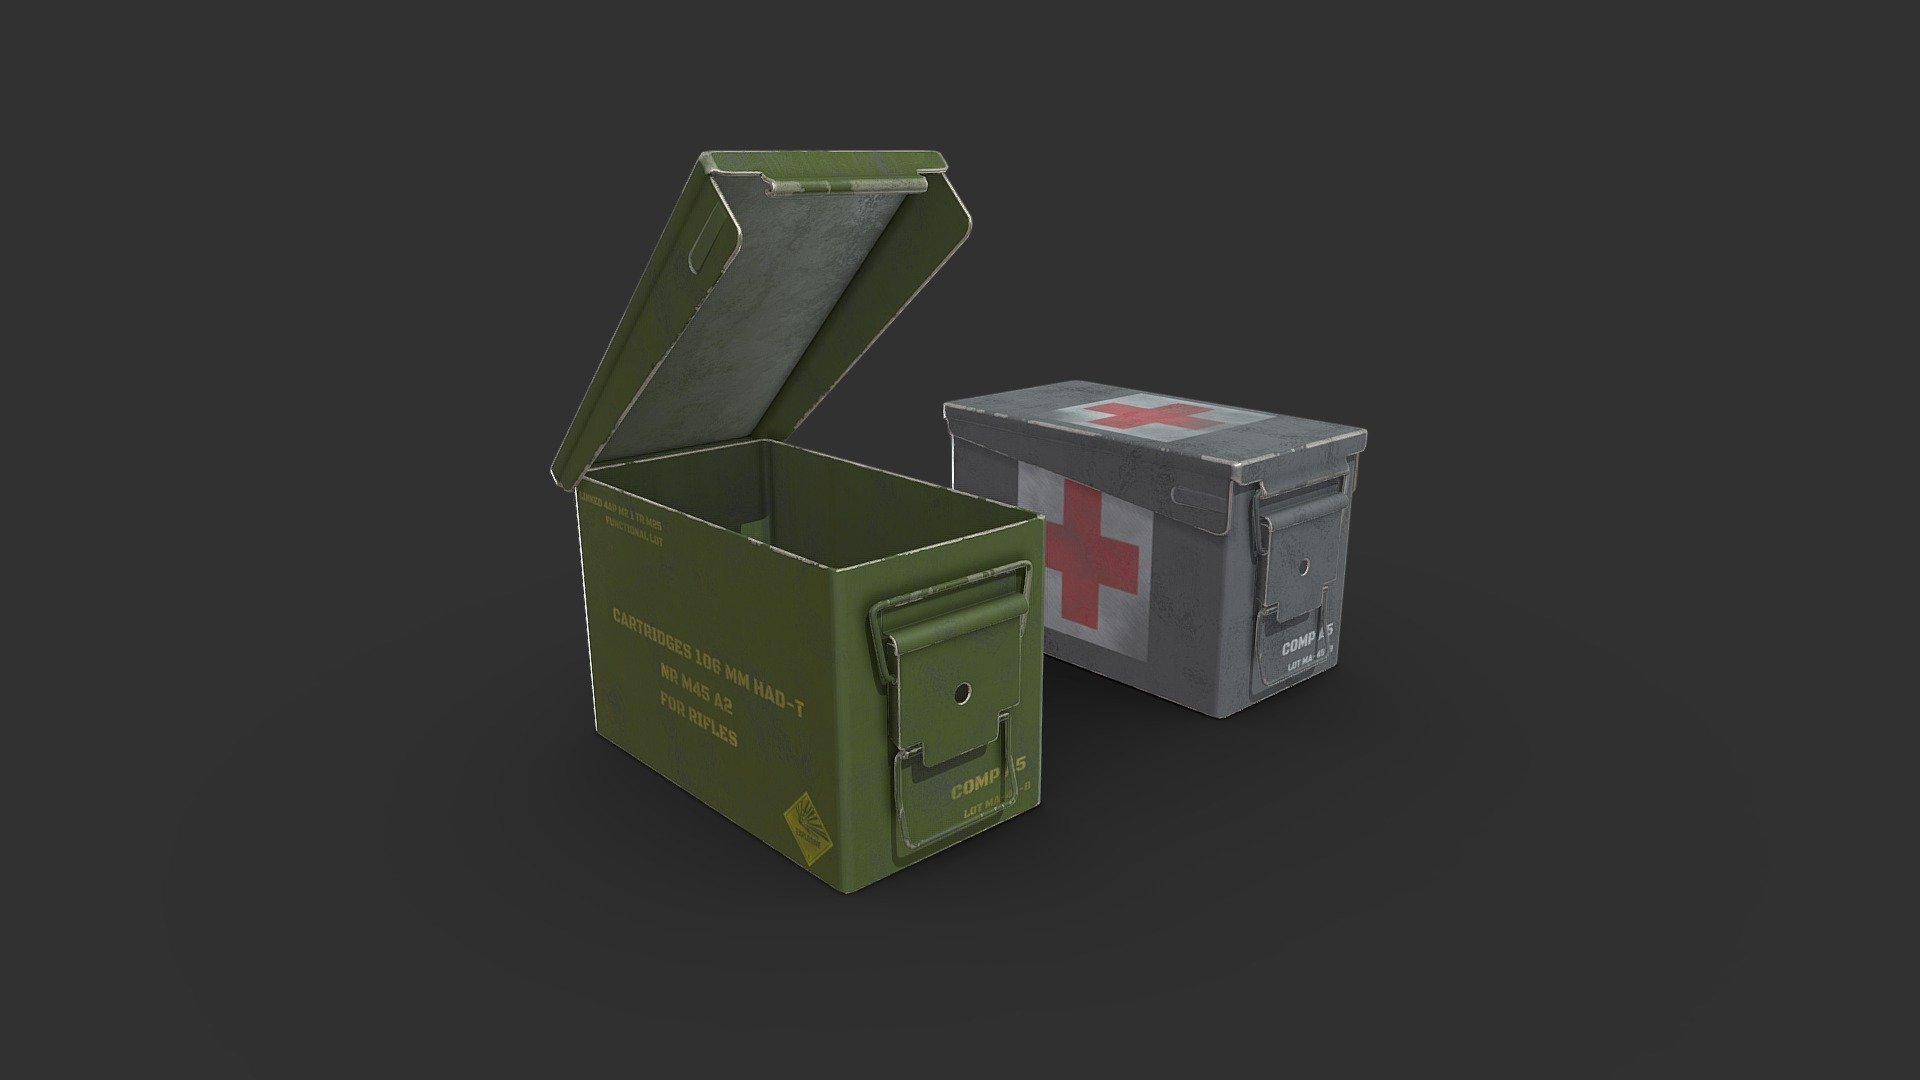 Military Supplybox




-Low-poly ready to use in Games, AR/VR (8308 Tris 1 box)

-2 texture variants ammo and med.

-Created in 3ds MAX 2018 no plugins used.

-Textures are in PNG format 2048x2048 PBR metalness.

-Files unit: Centimeters.

-Available formats: MAX 2018 and 2015, OBJ, MTL, FBX, .tbscene.

-If you need any other file format you can always request it.

-All formats include materials and textures.
 - Military Supply Box - Buy Royalty Free 3D model by MaX3Dd 3d model